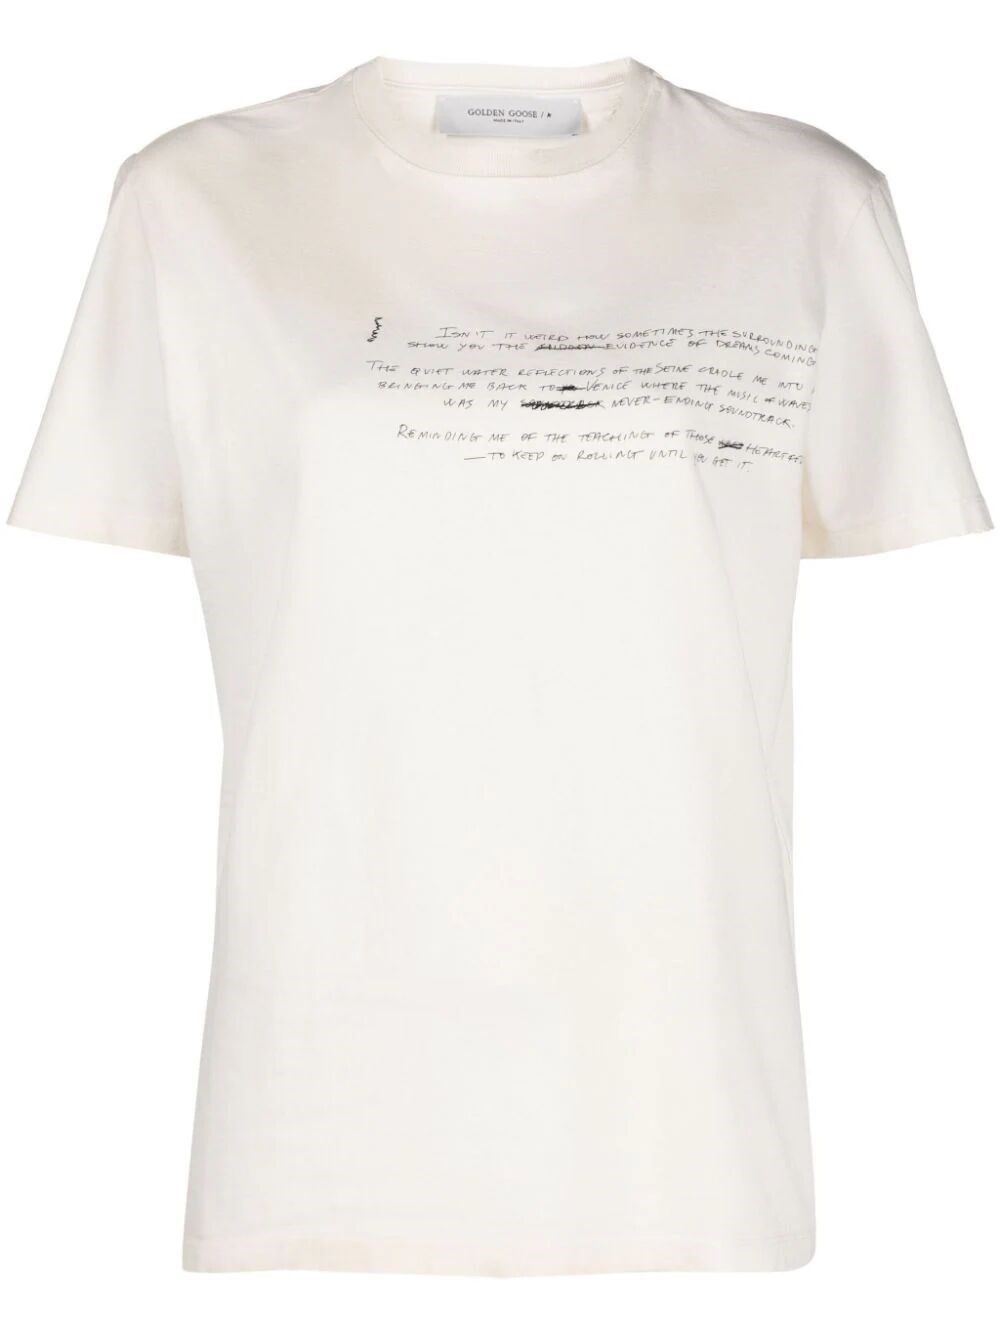 Golden Goose Embroidered Lettering T-shirt In White